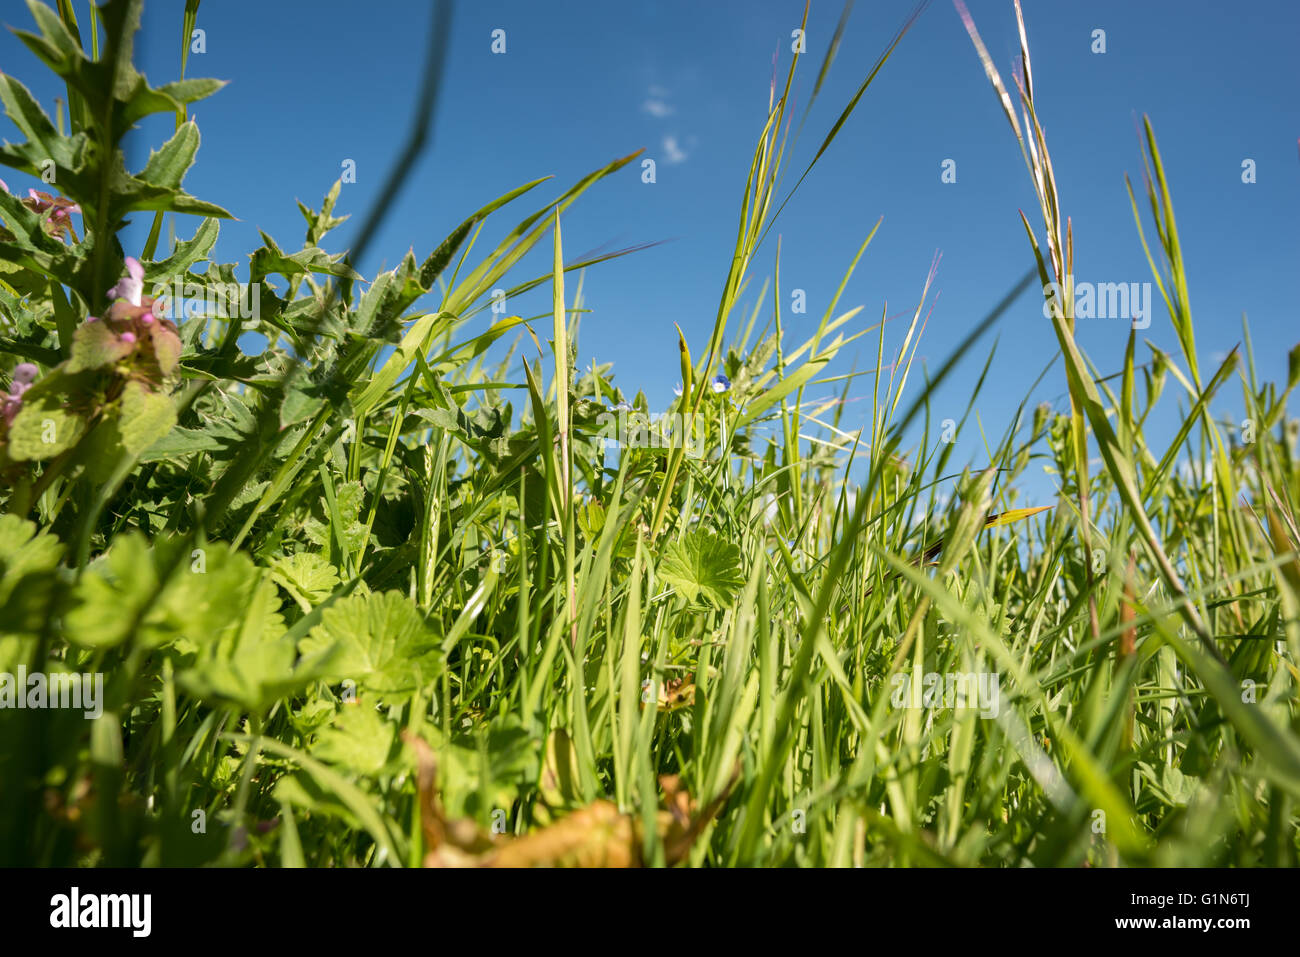 Green field and blue sky Banque D'Images